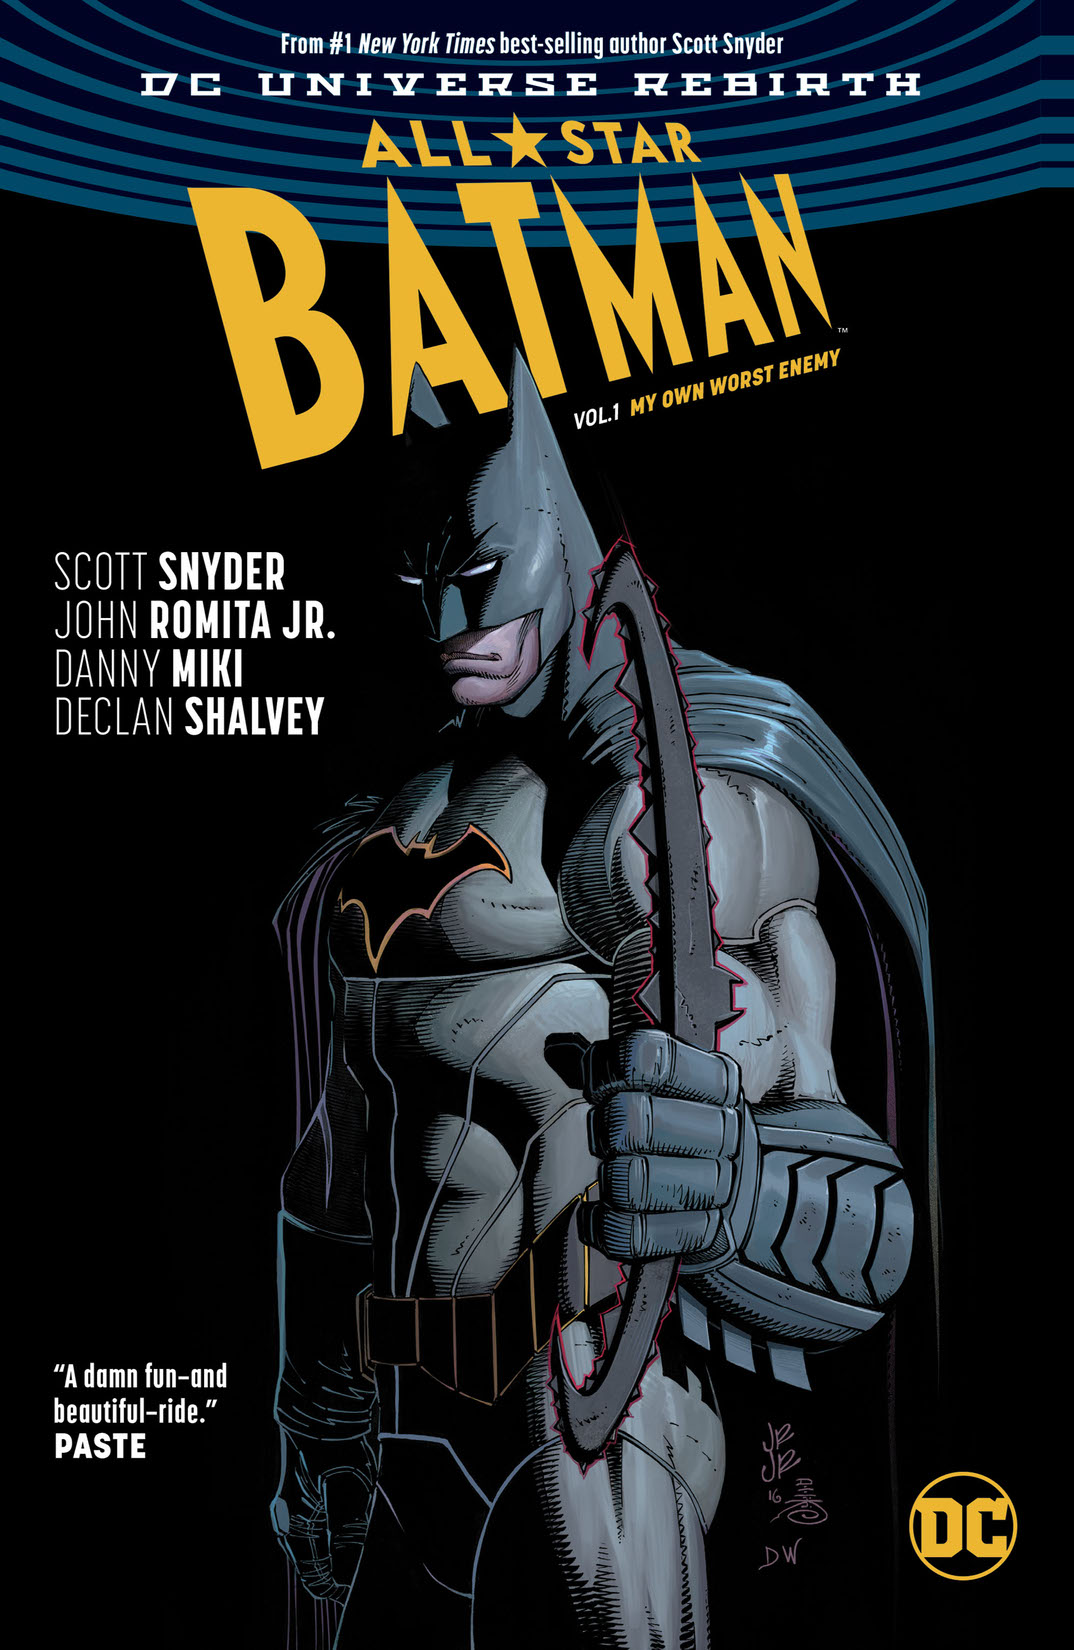 All Star Batman Vol. 1: My Own Worst Enemy preview images